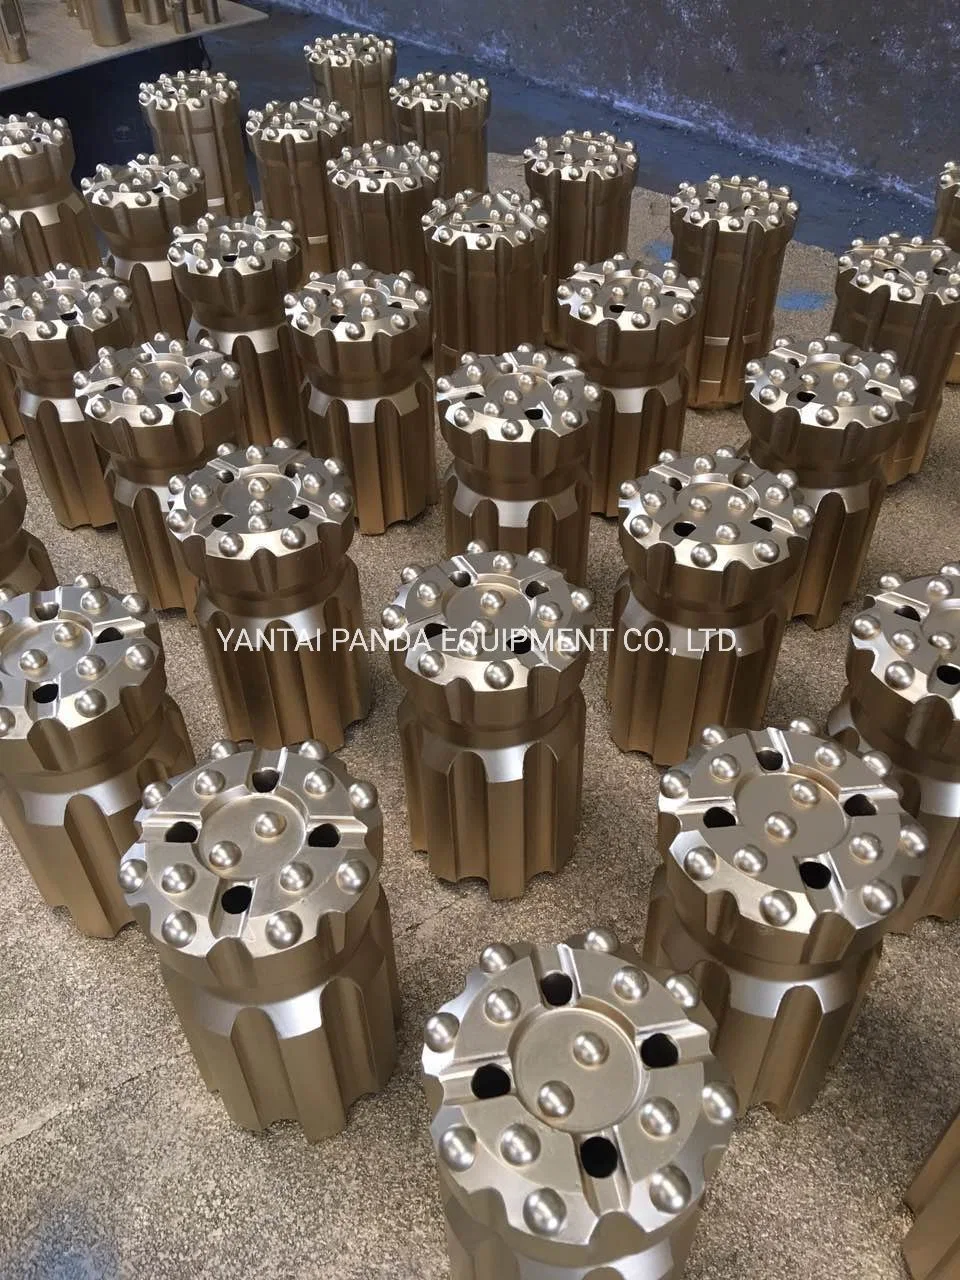 T38, T45 and T51 Thread Button Bit for The Hard Rock Drilling